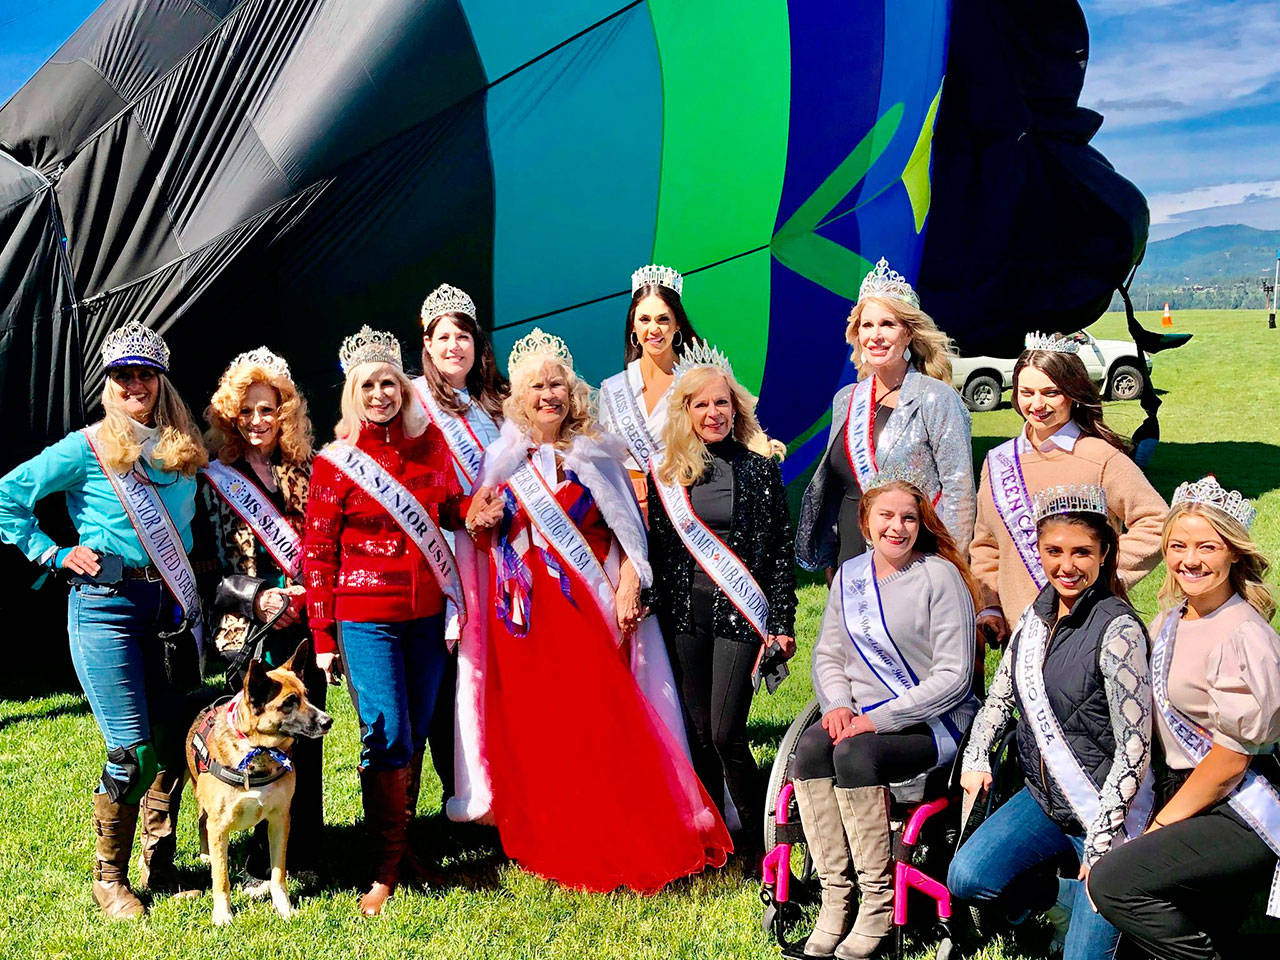 Various royalty through The Global Beauty Awards, including Captain-Crystal Stout, aka Ms. Senior United States, on far left, gathered for photo ops with the Dream Catcher Balloon in late May in Coeur d’Alene, ID. While too windy to fly, participants were able to sit in the balloon for photos. Submitted photo